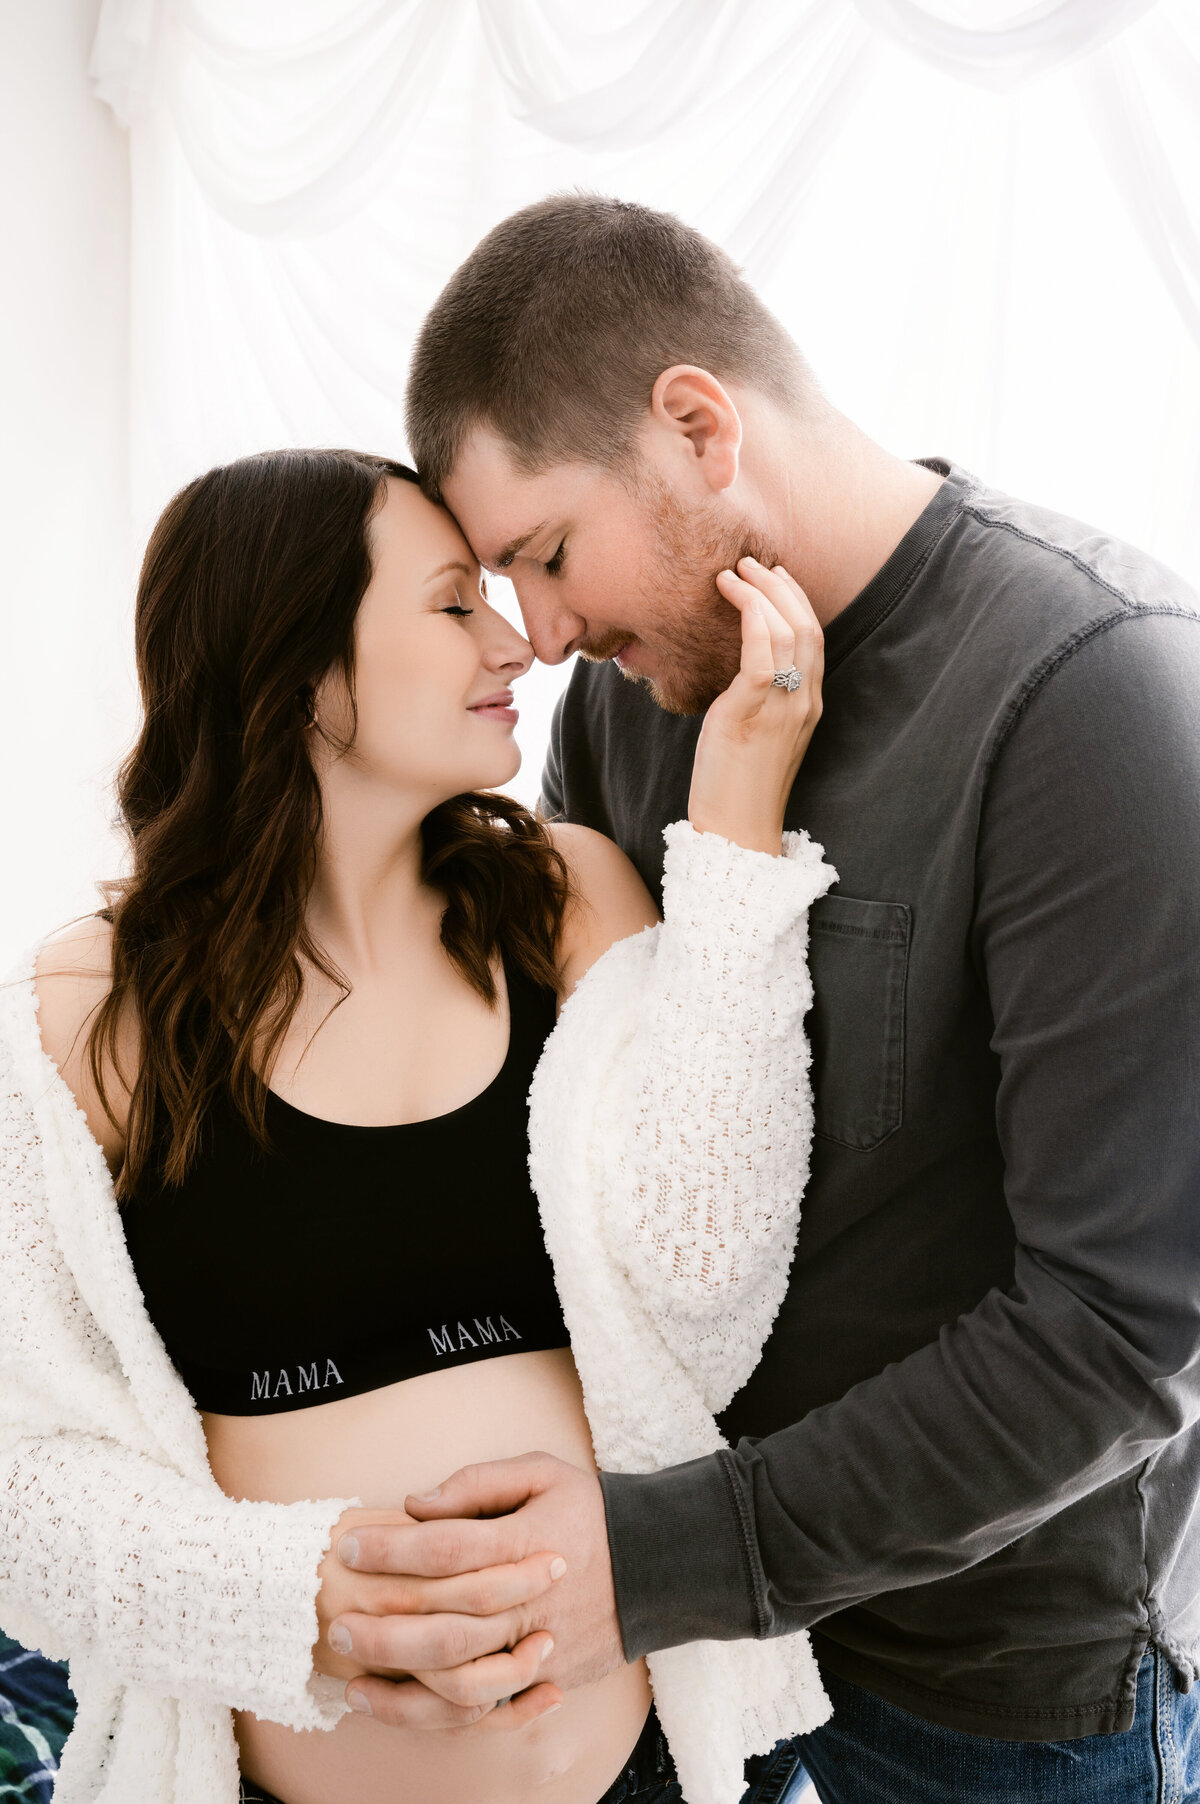 Lifestyle Romantic | Intimate | Maternity | Casual | Photo Session | Pregnancy Photos